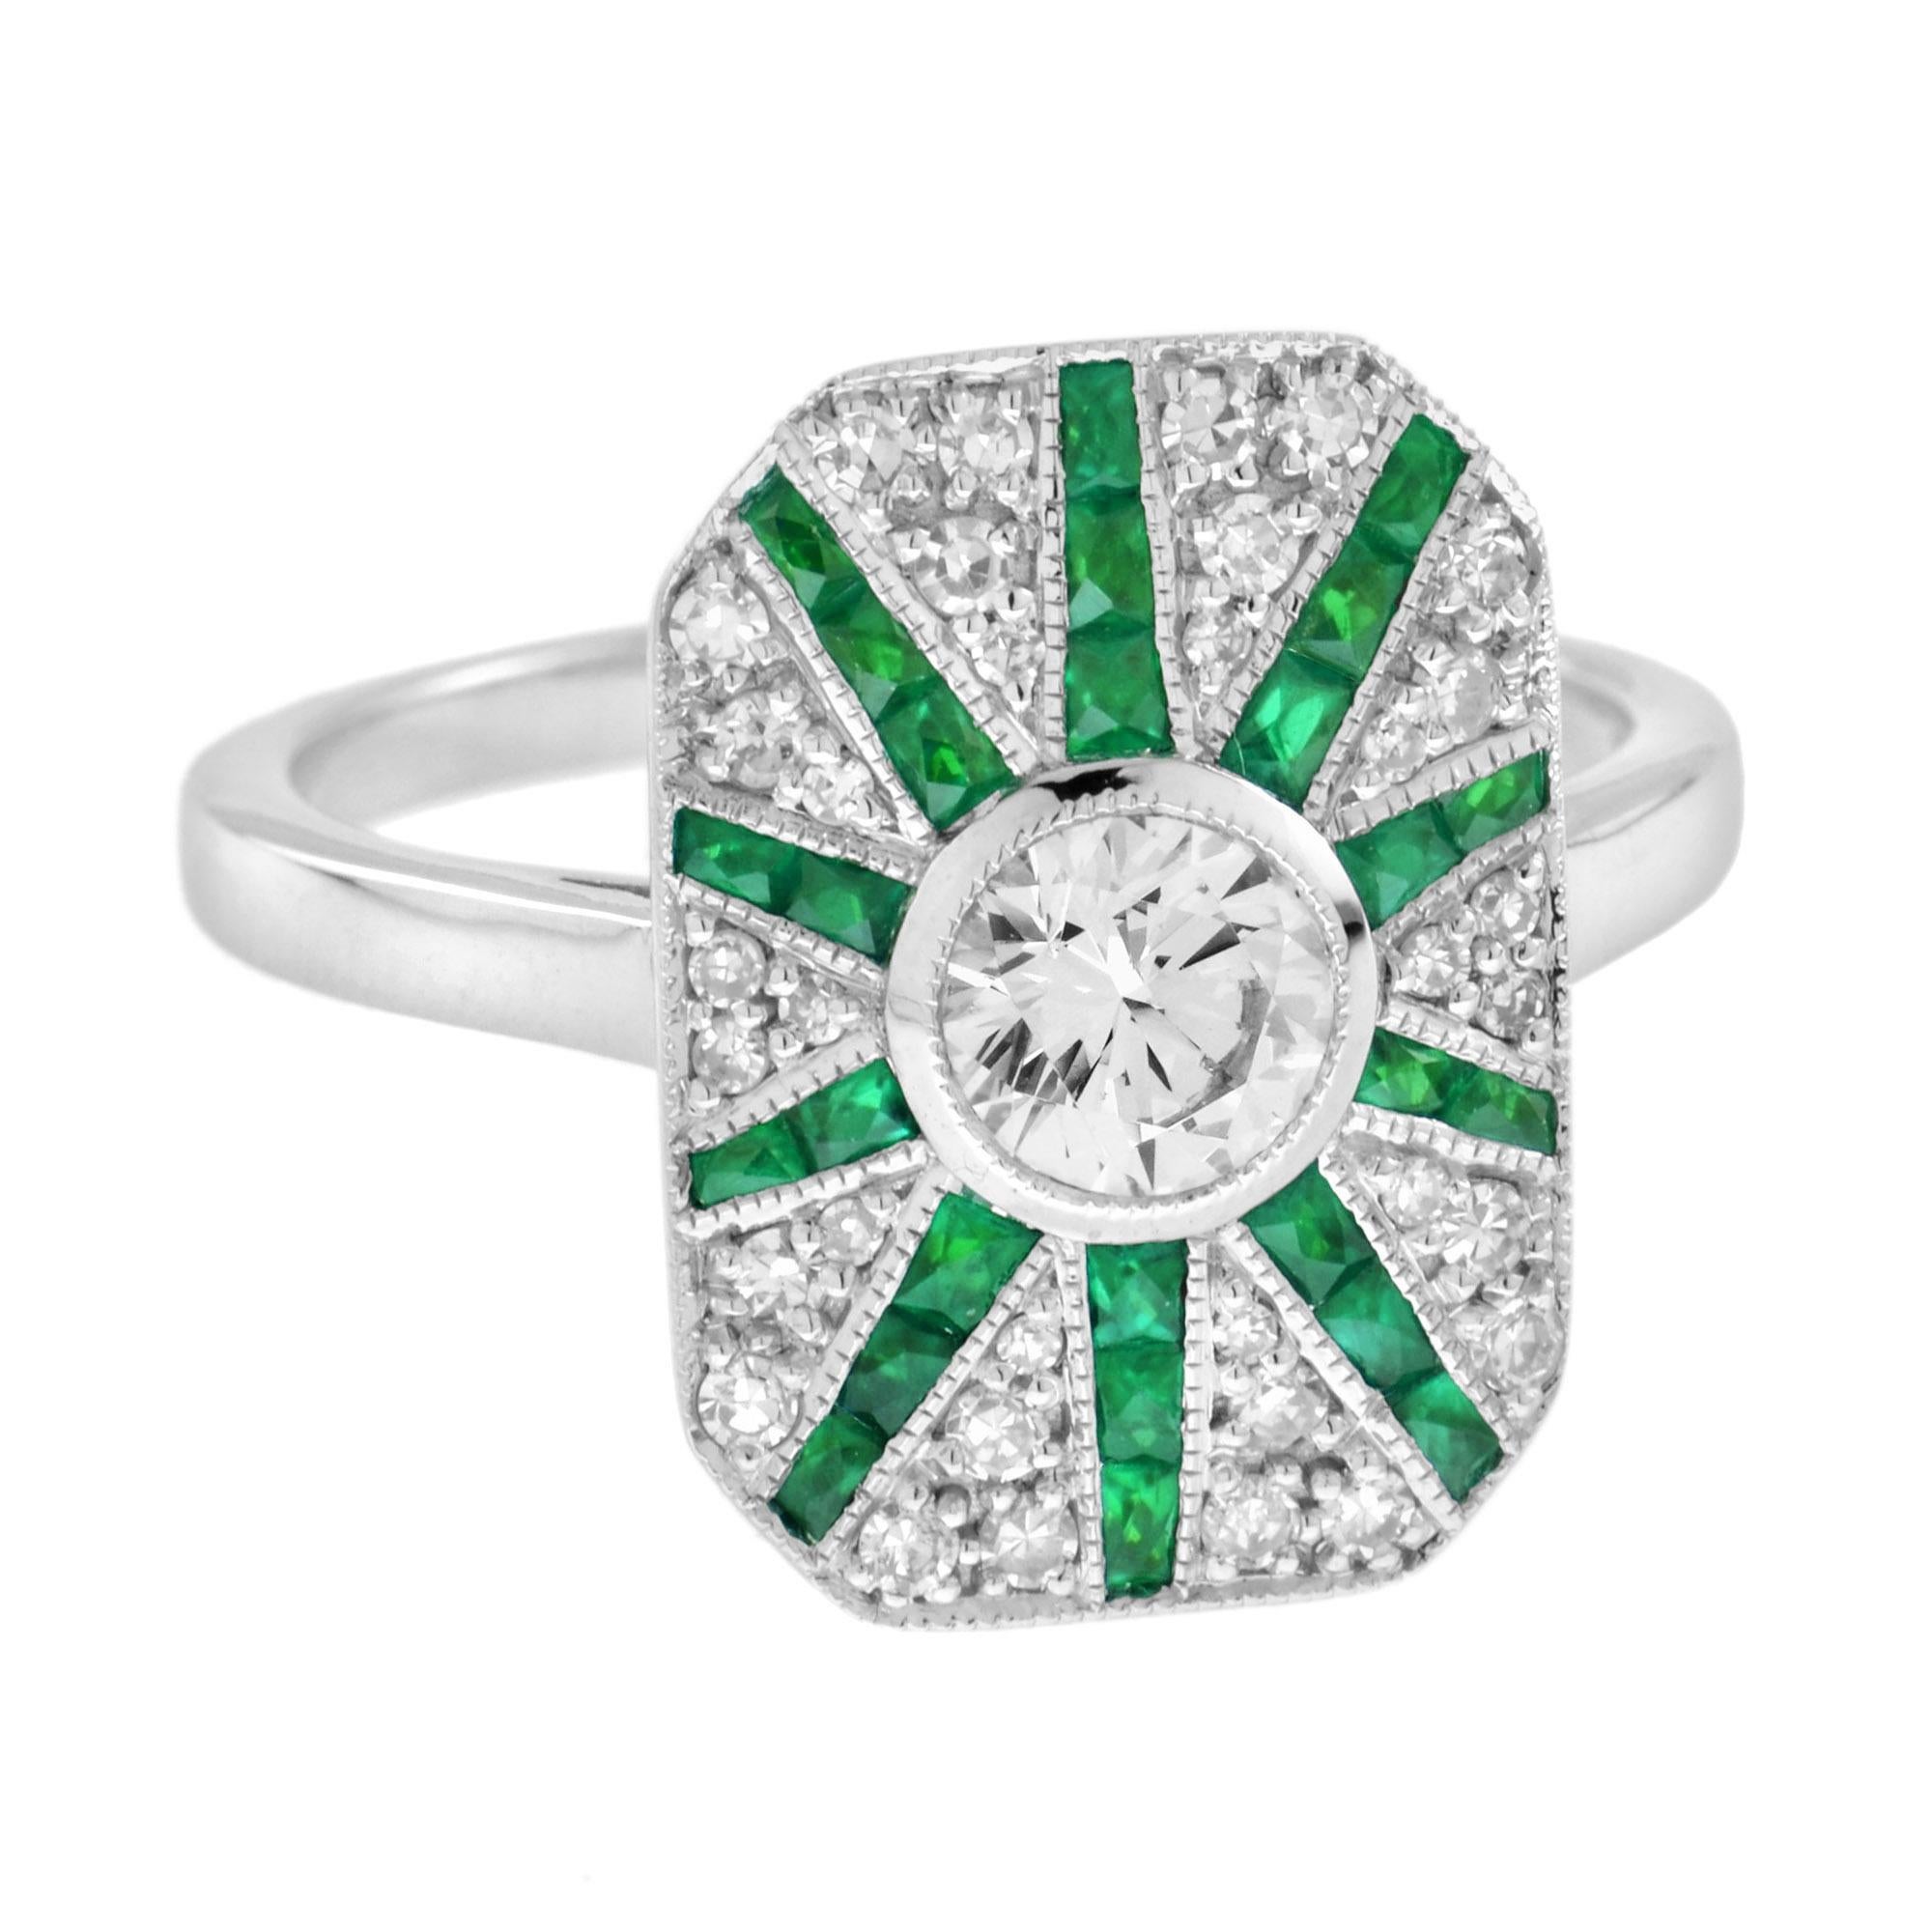 For Sale:  Diamond and Emerald Art Deco Style Halo Ring in 18K White Gold 3